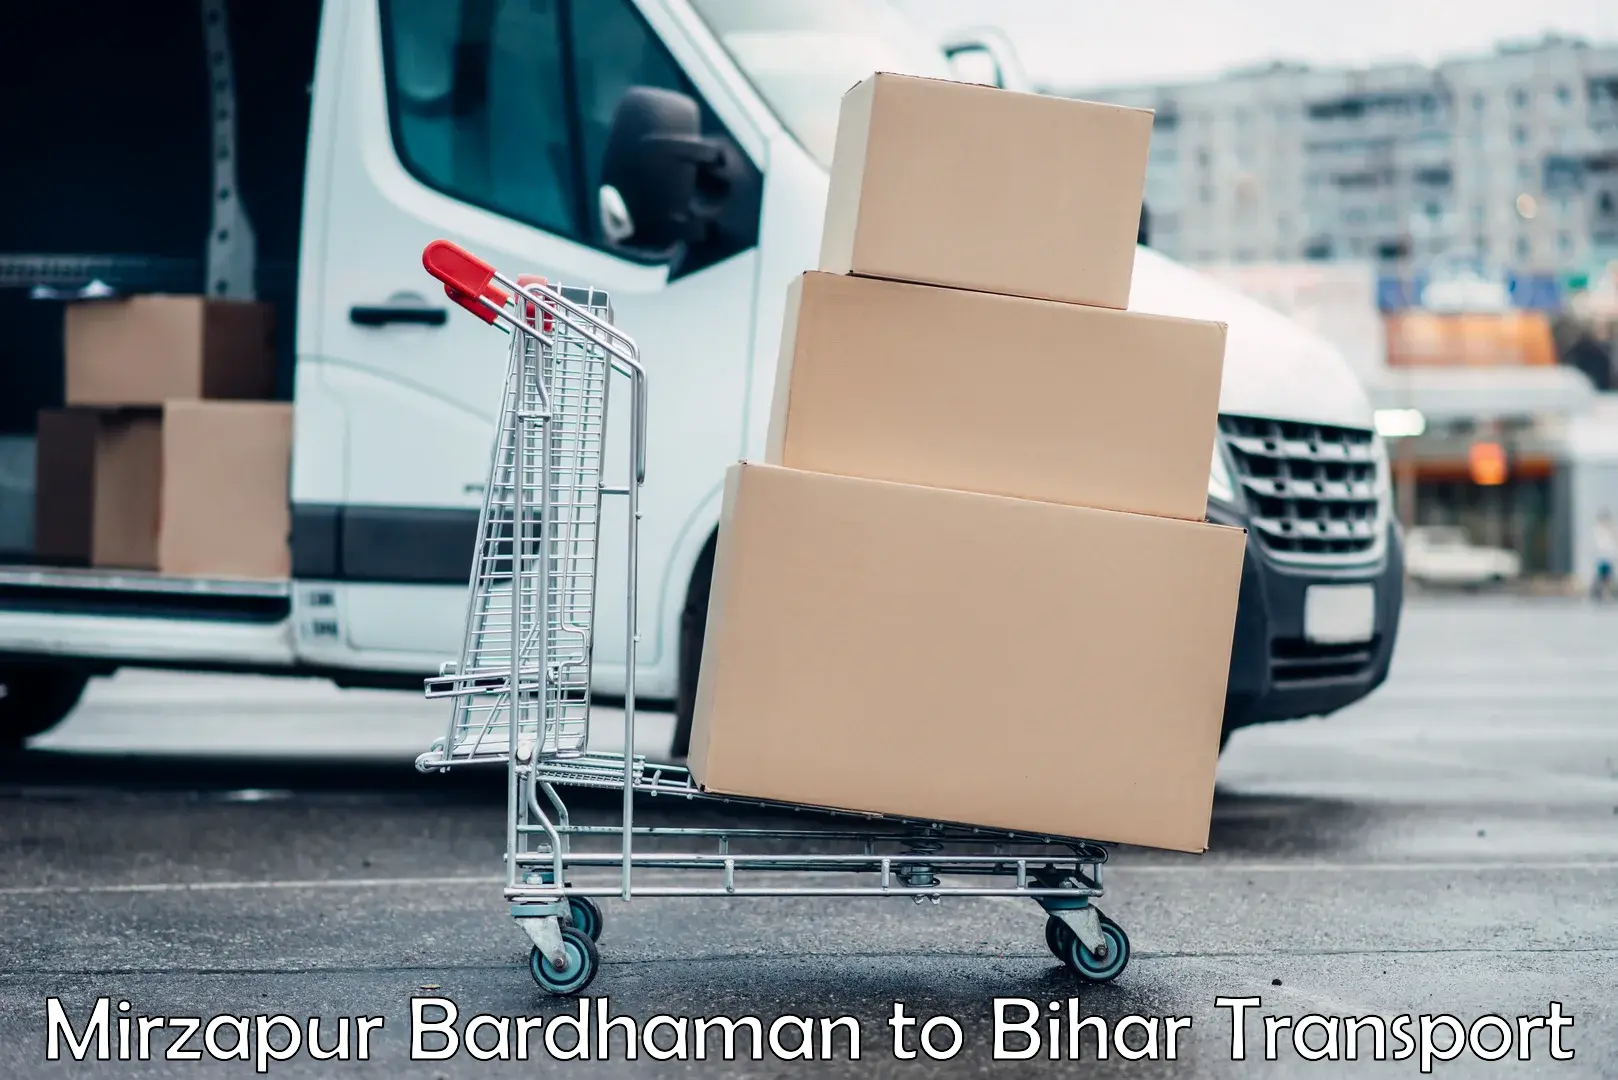 Container transport service Mirzapur Bardhaman to Araria